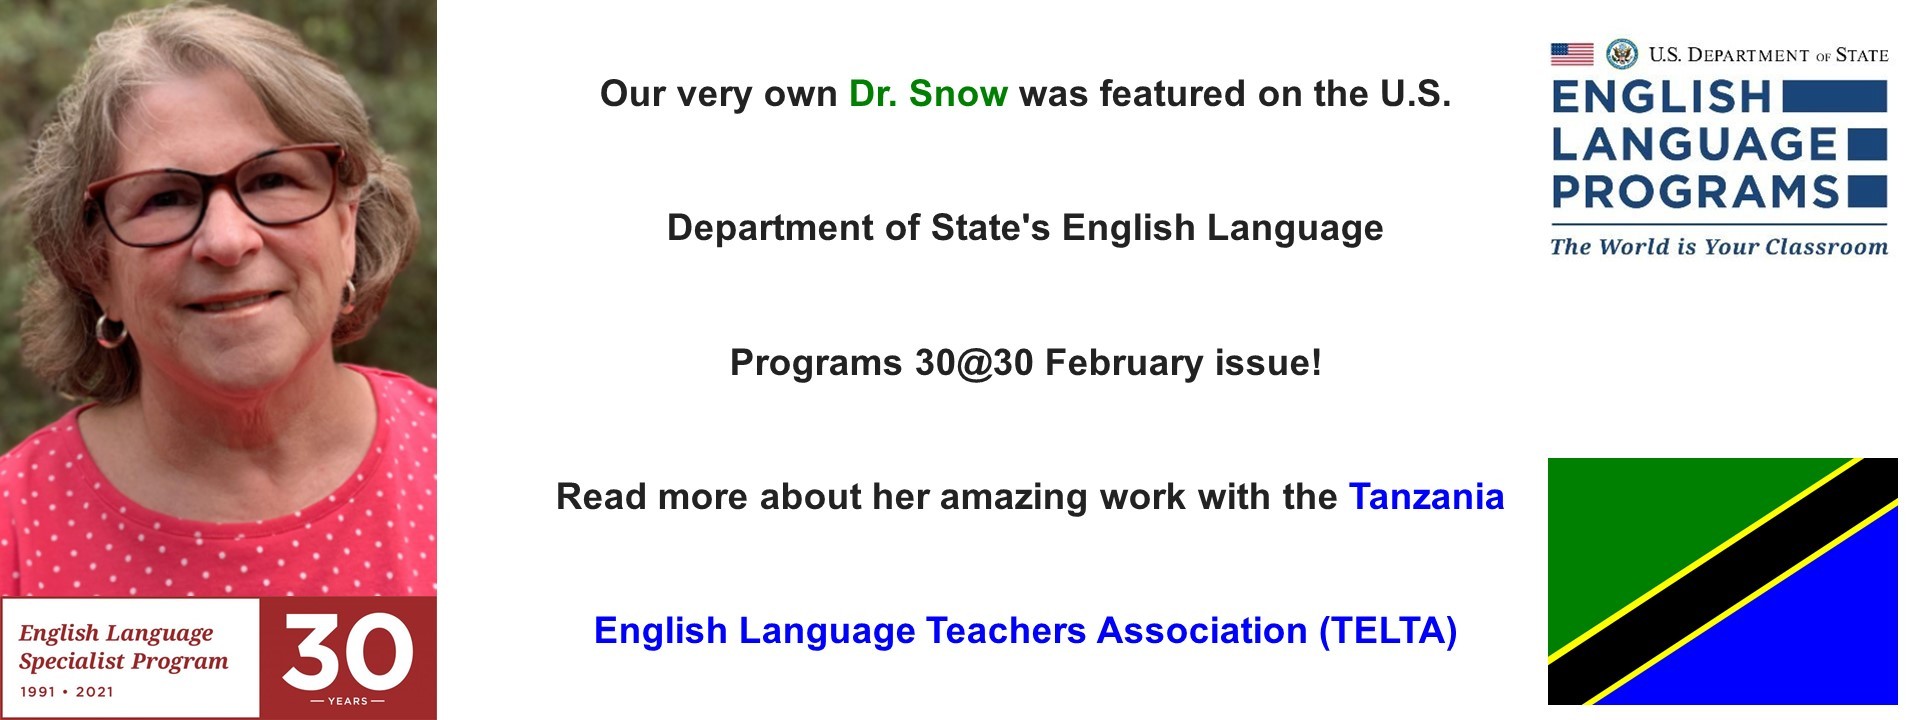 Our very own Dr. Snow was featured on the U.S. Department of State's English Language Programs 30@30 February issue! Read more a